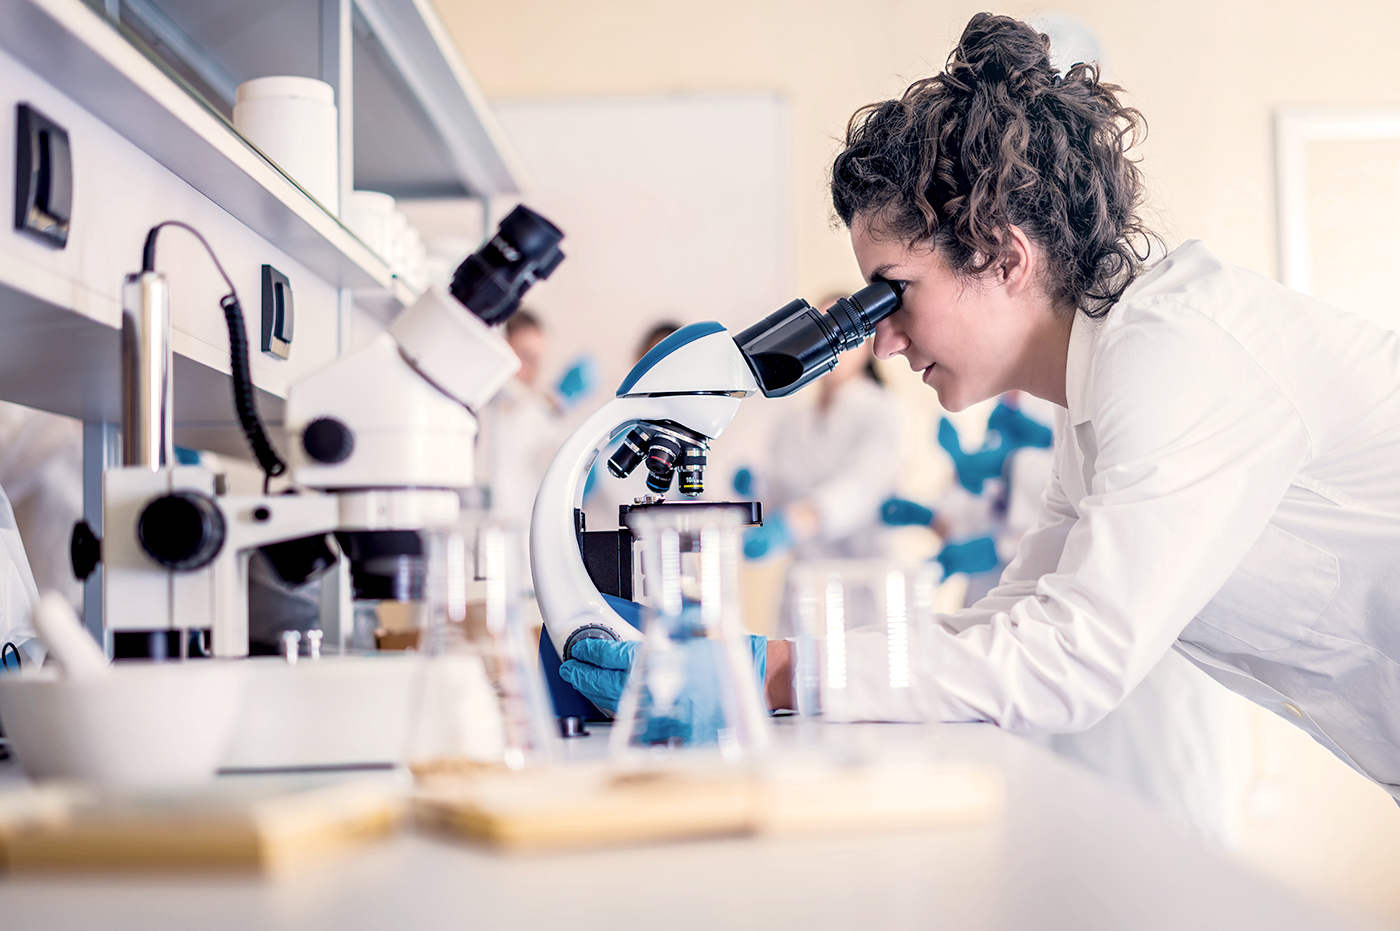 A female researcher looking at something with a microscope in a lab.